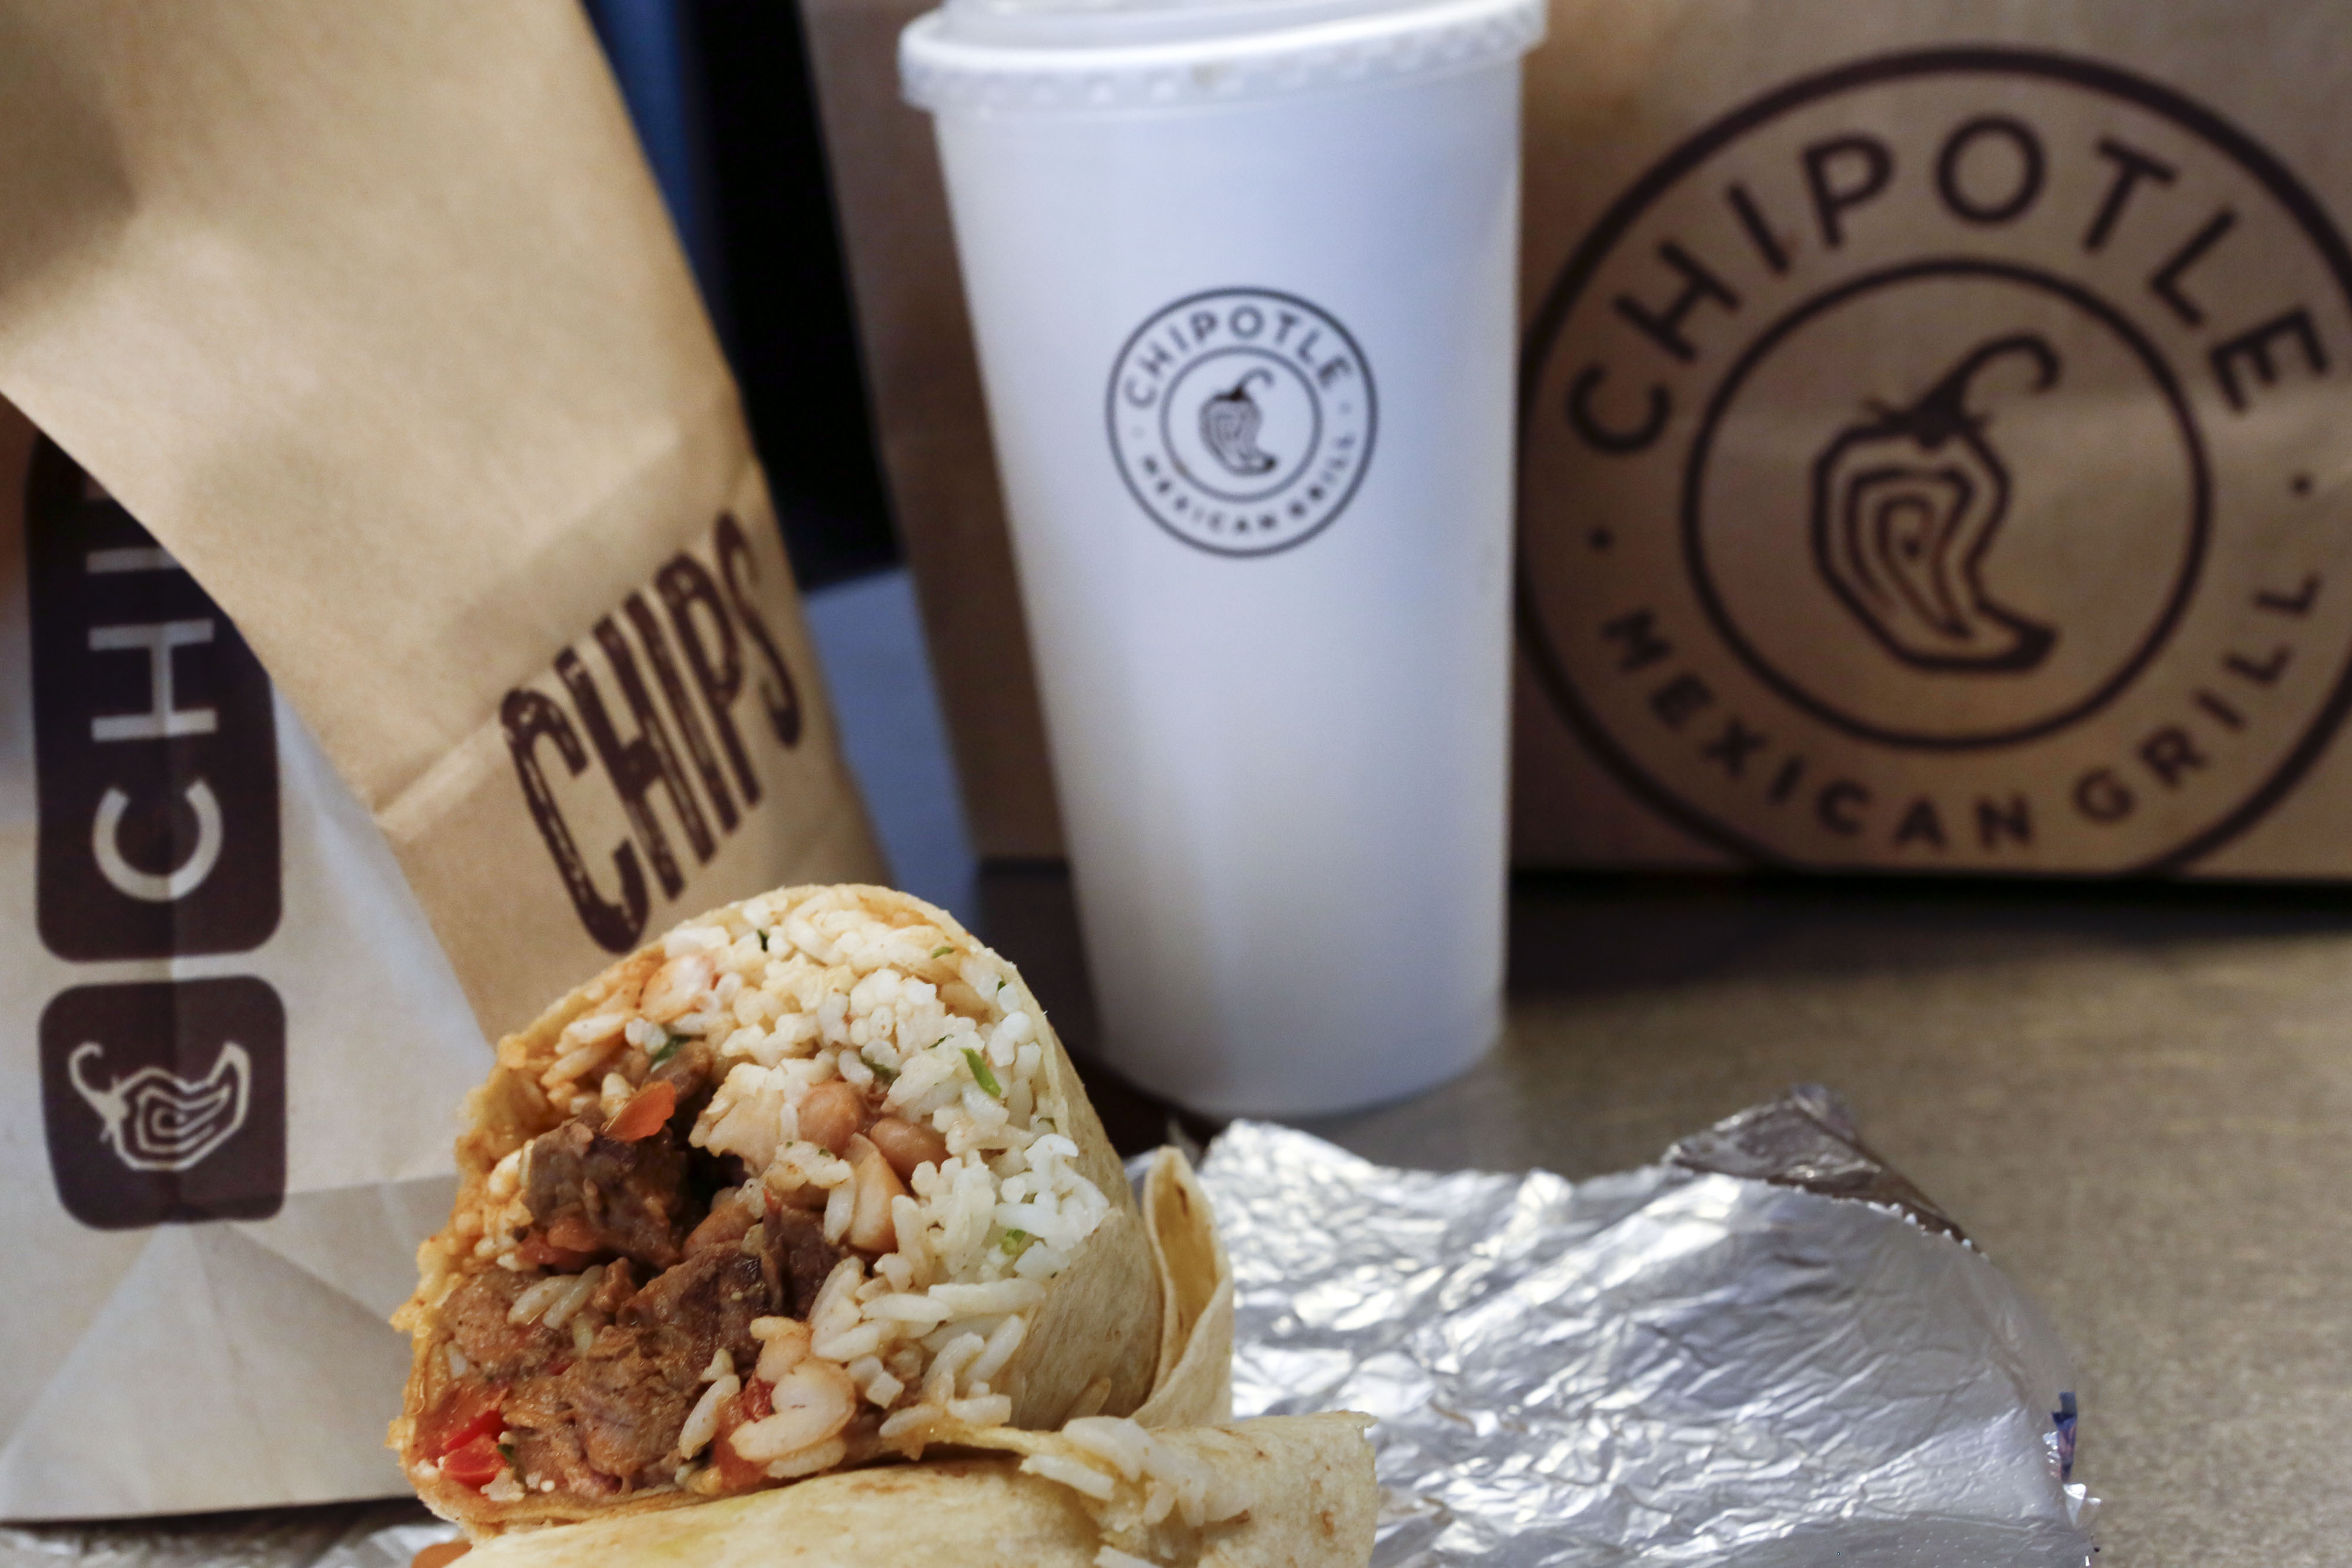 A steak burrito is arranged for a photograph with a drink and bags of chips at a Chipotle Mexican Grill Inc. restaurant in Hollywood, California, U.S., on Tuesday, July 16, 2013. (Patrick T. Fallon&mdash;Bloomberg/Getty Images)